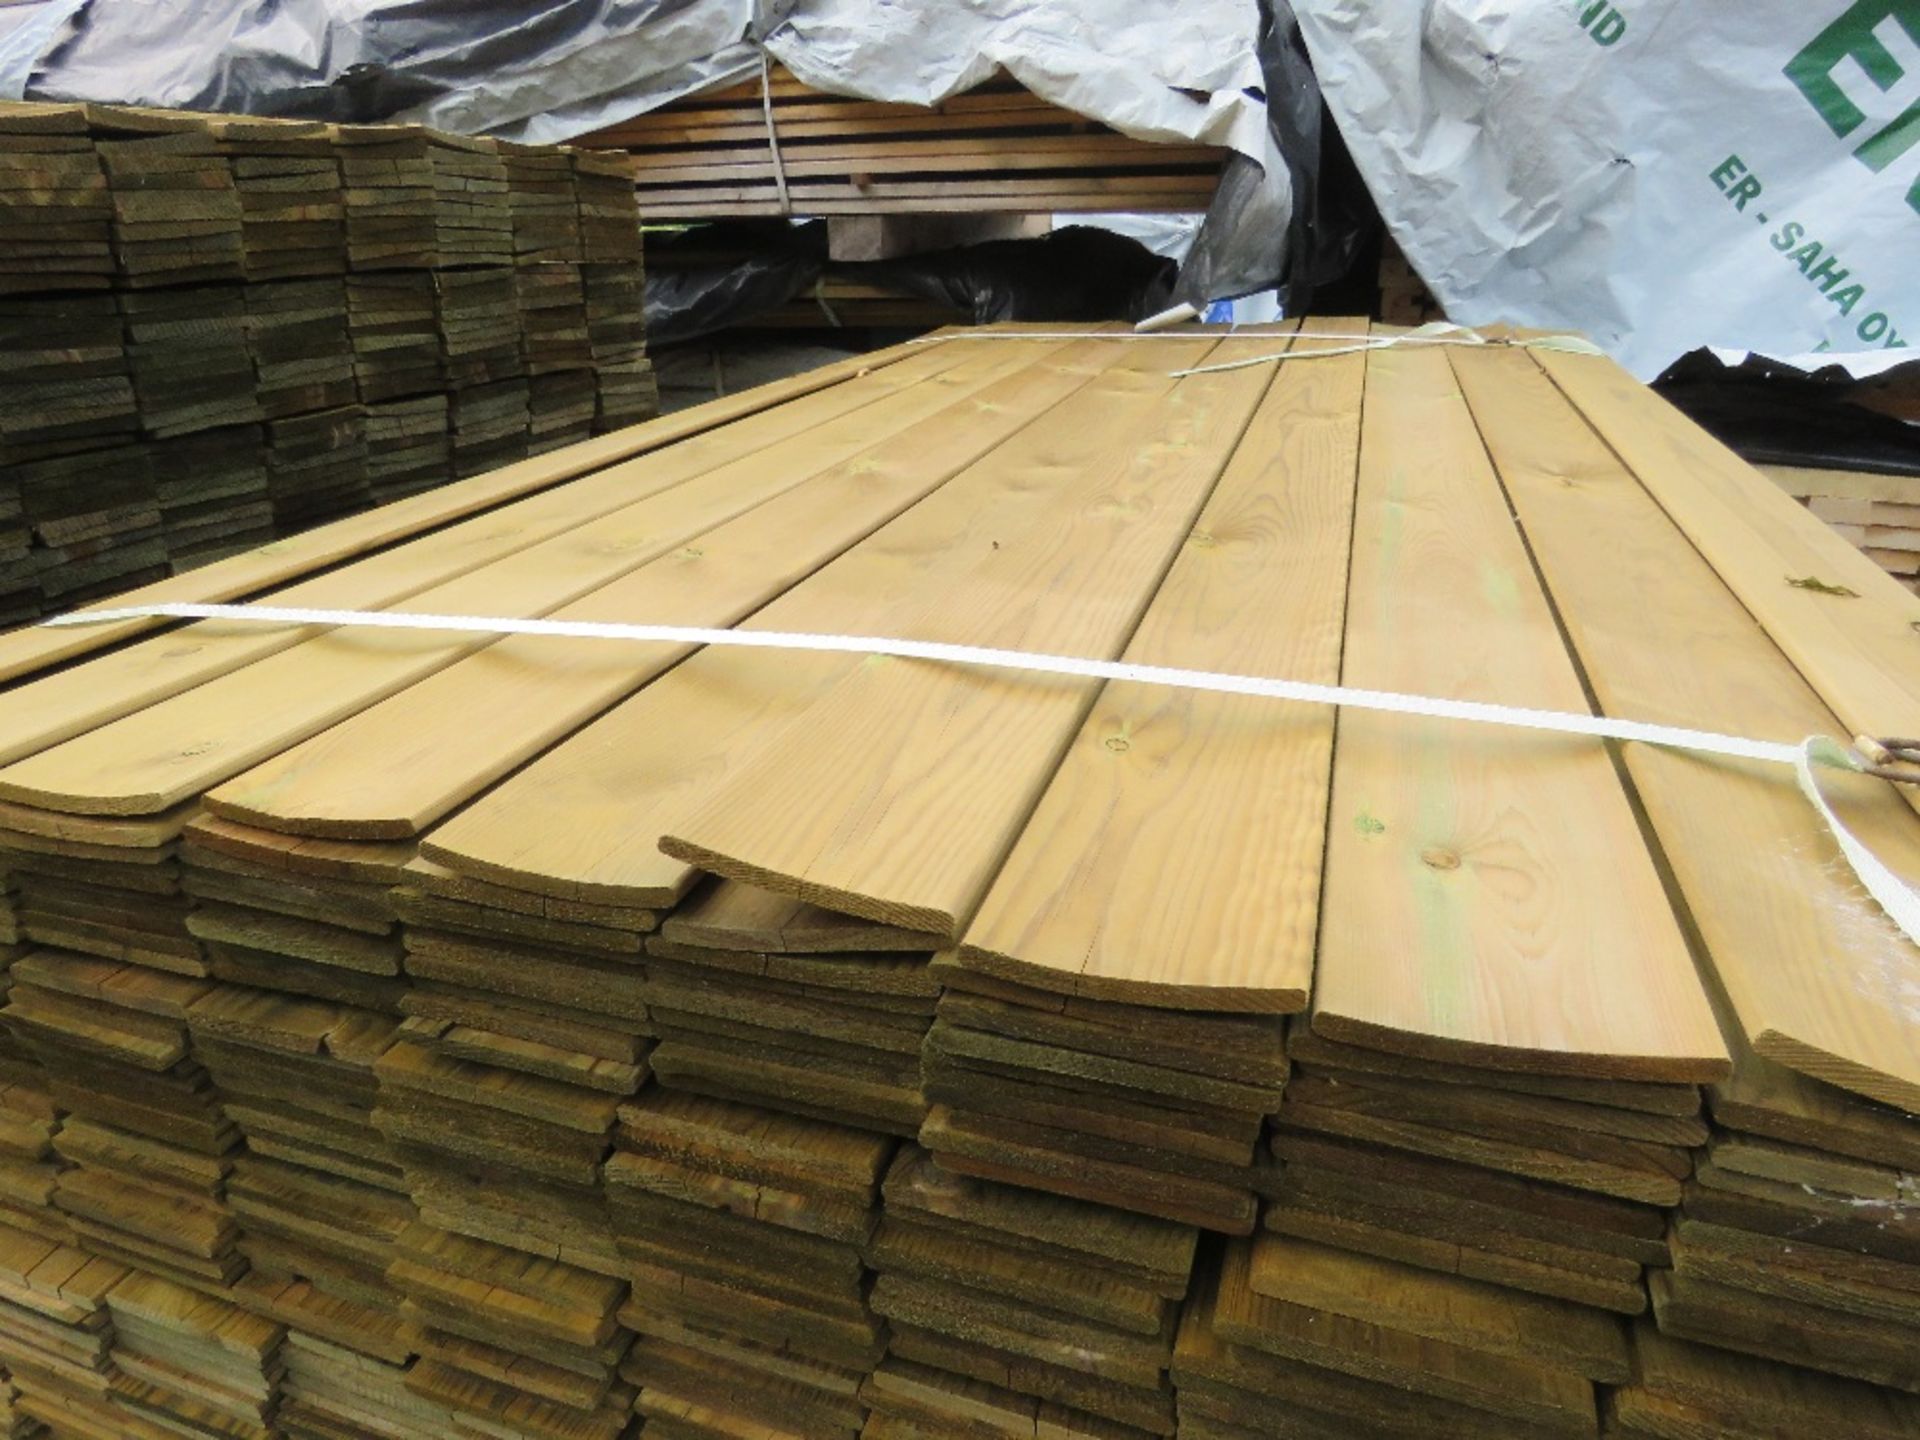 LARGE PACK OF TREATED HIT AND MISS FENCE CLADDING TIMBER BOARDS, 1.75M LENGTH X 95MM WIDTH APPROX. - Image 3 of 3